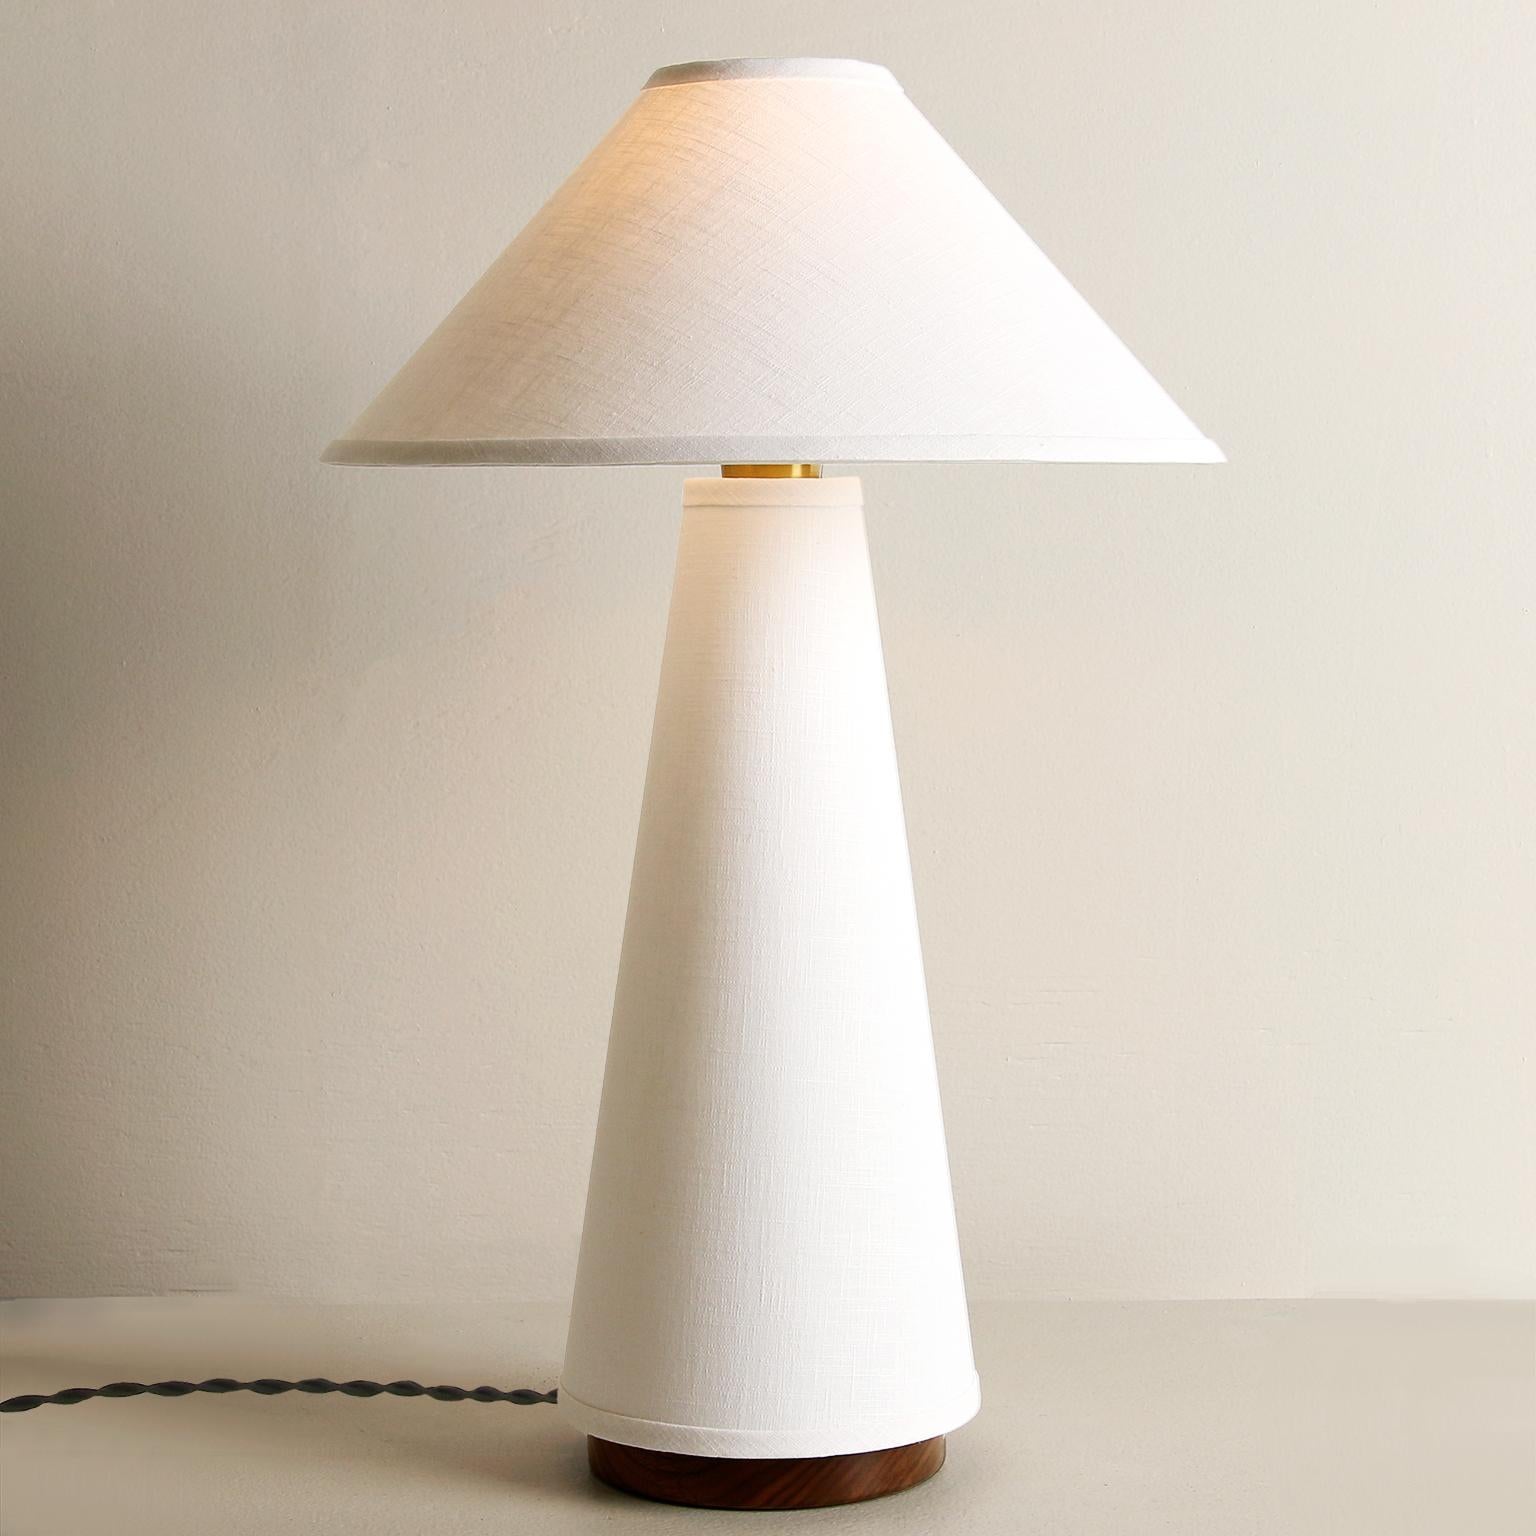 The Linden table lamp features a cream linen shade and lamp body, solid hardwood walnut base, and brass details. A study in duality, the piece explores the balance between soft, flowing fabric and structured, conical forms. Bulb sold separately.